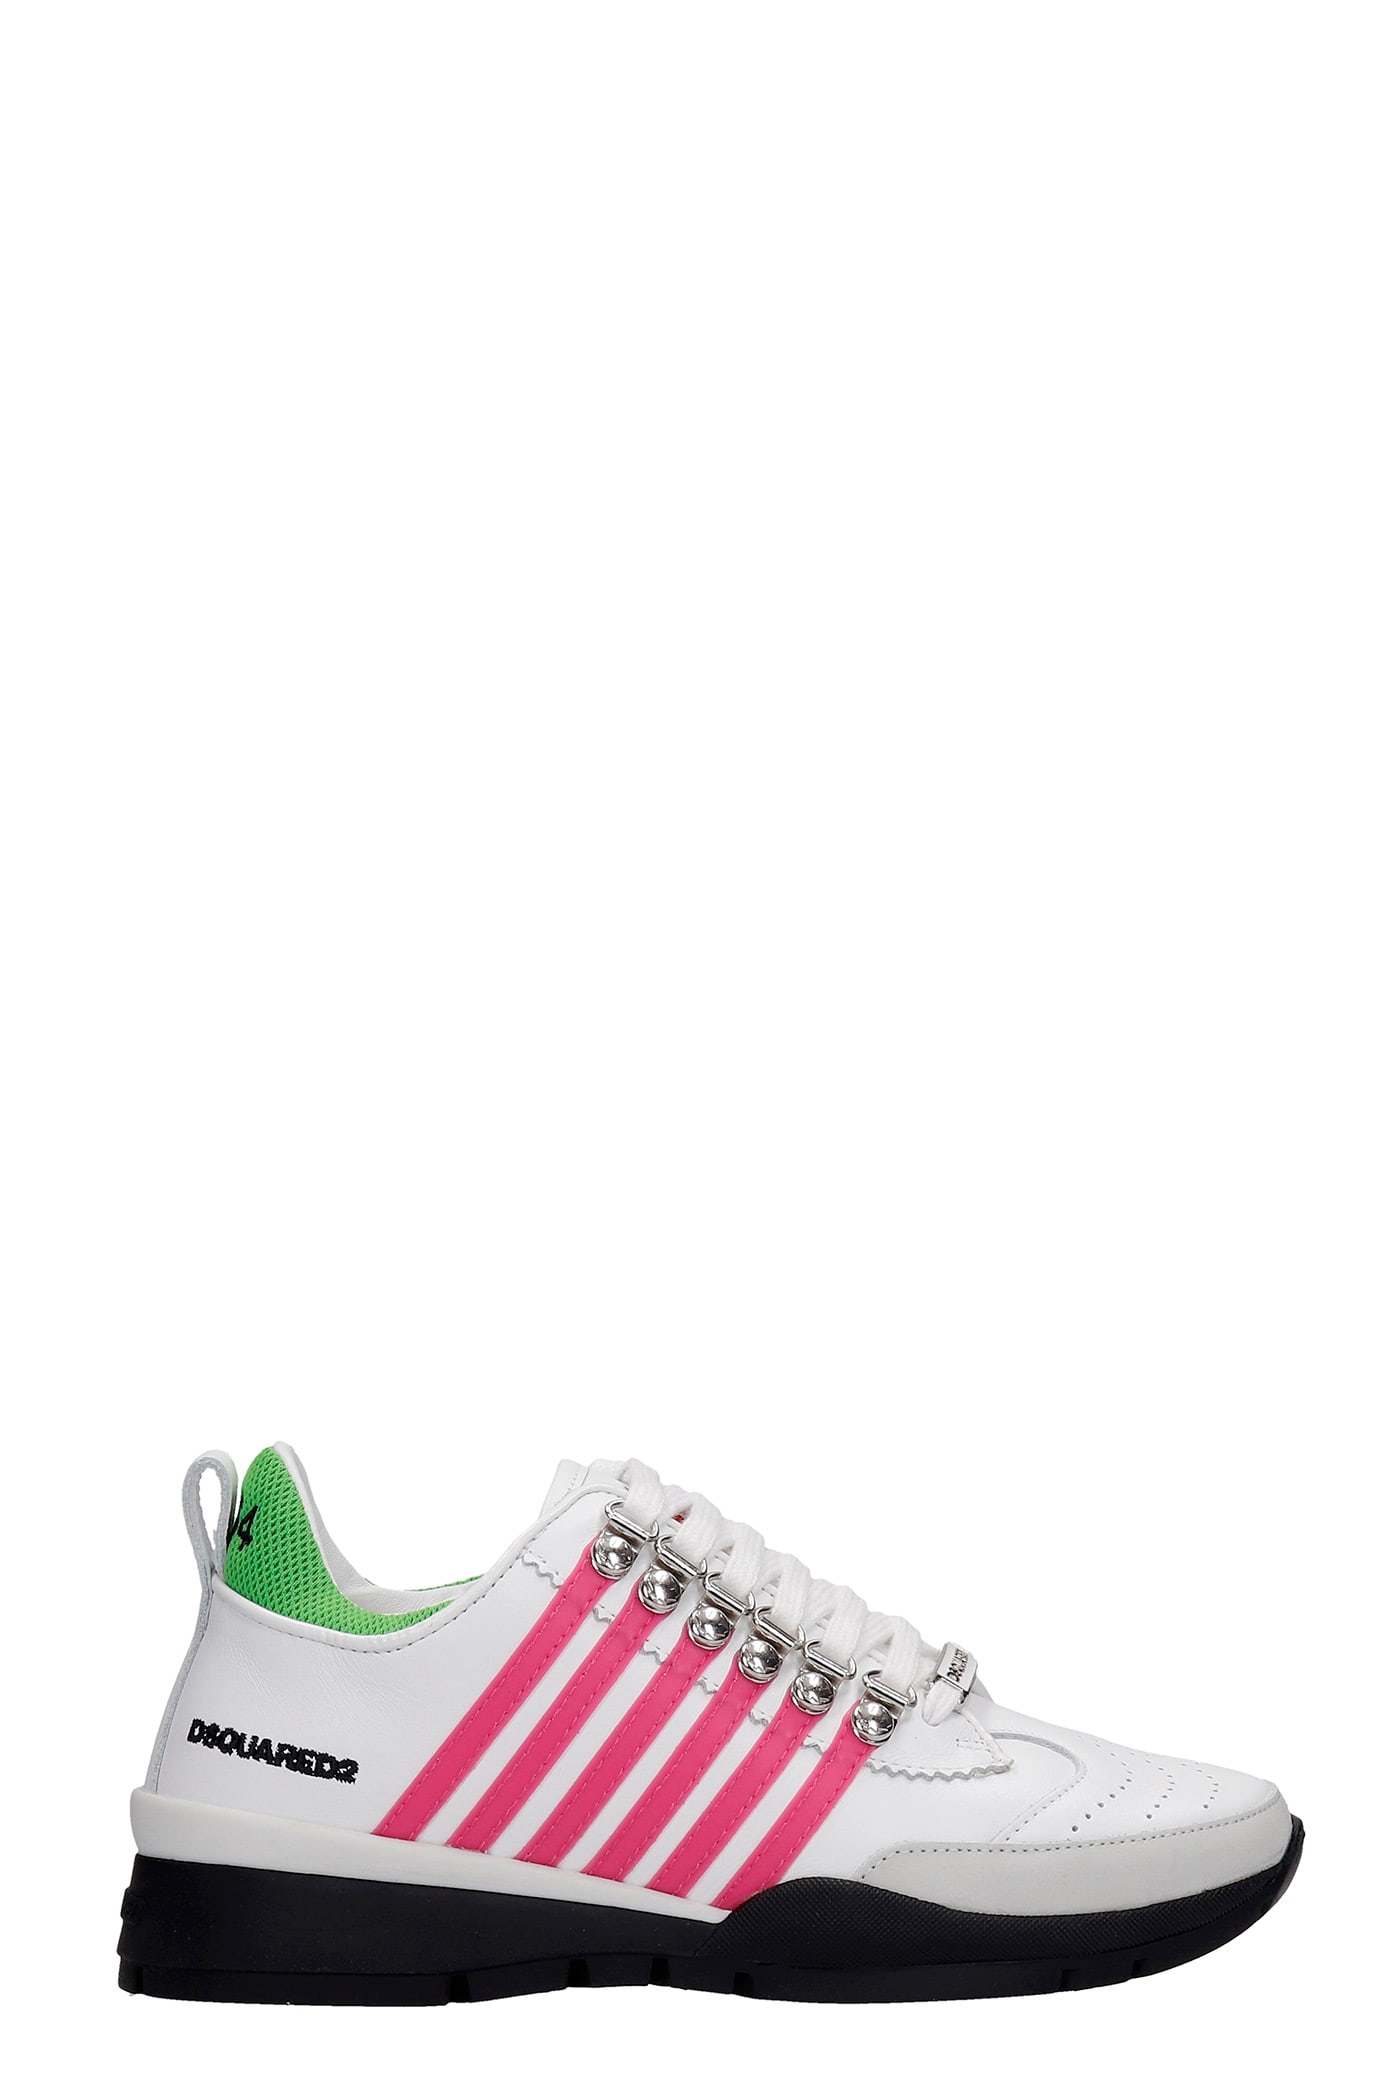 Dsquared2 Sneakers In White Leather